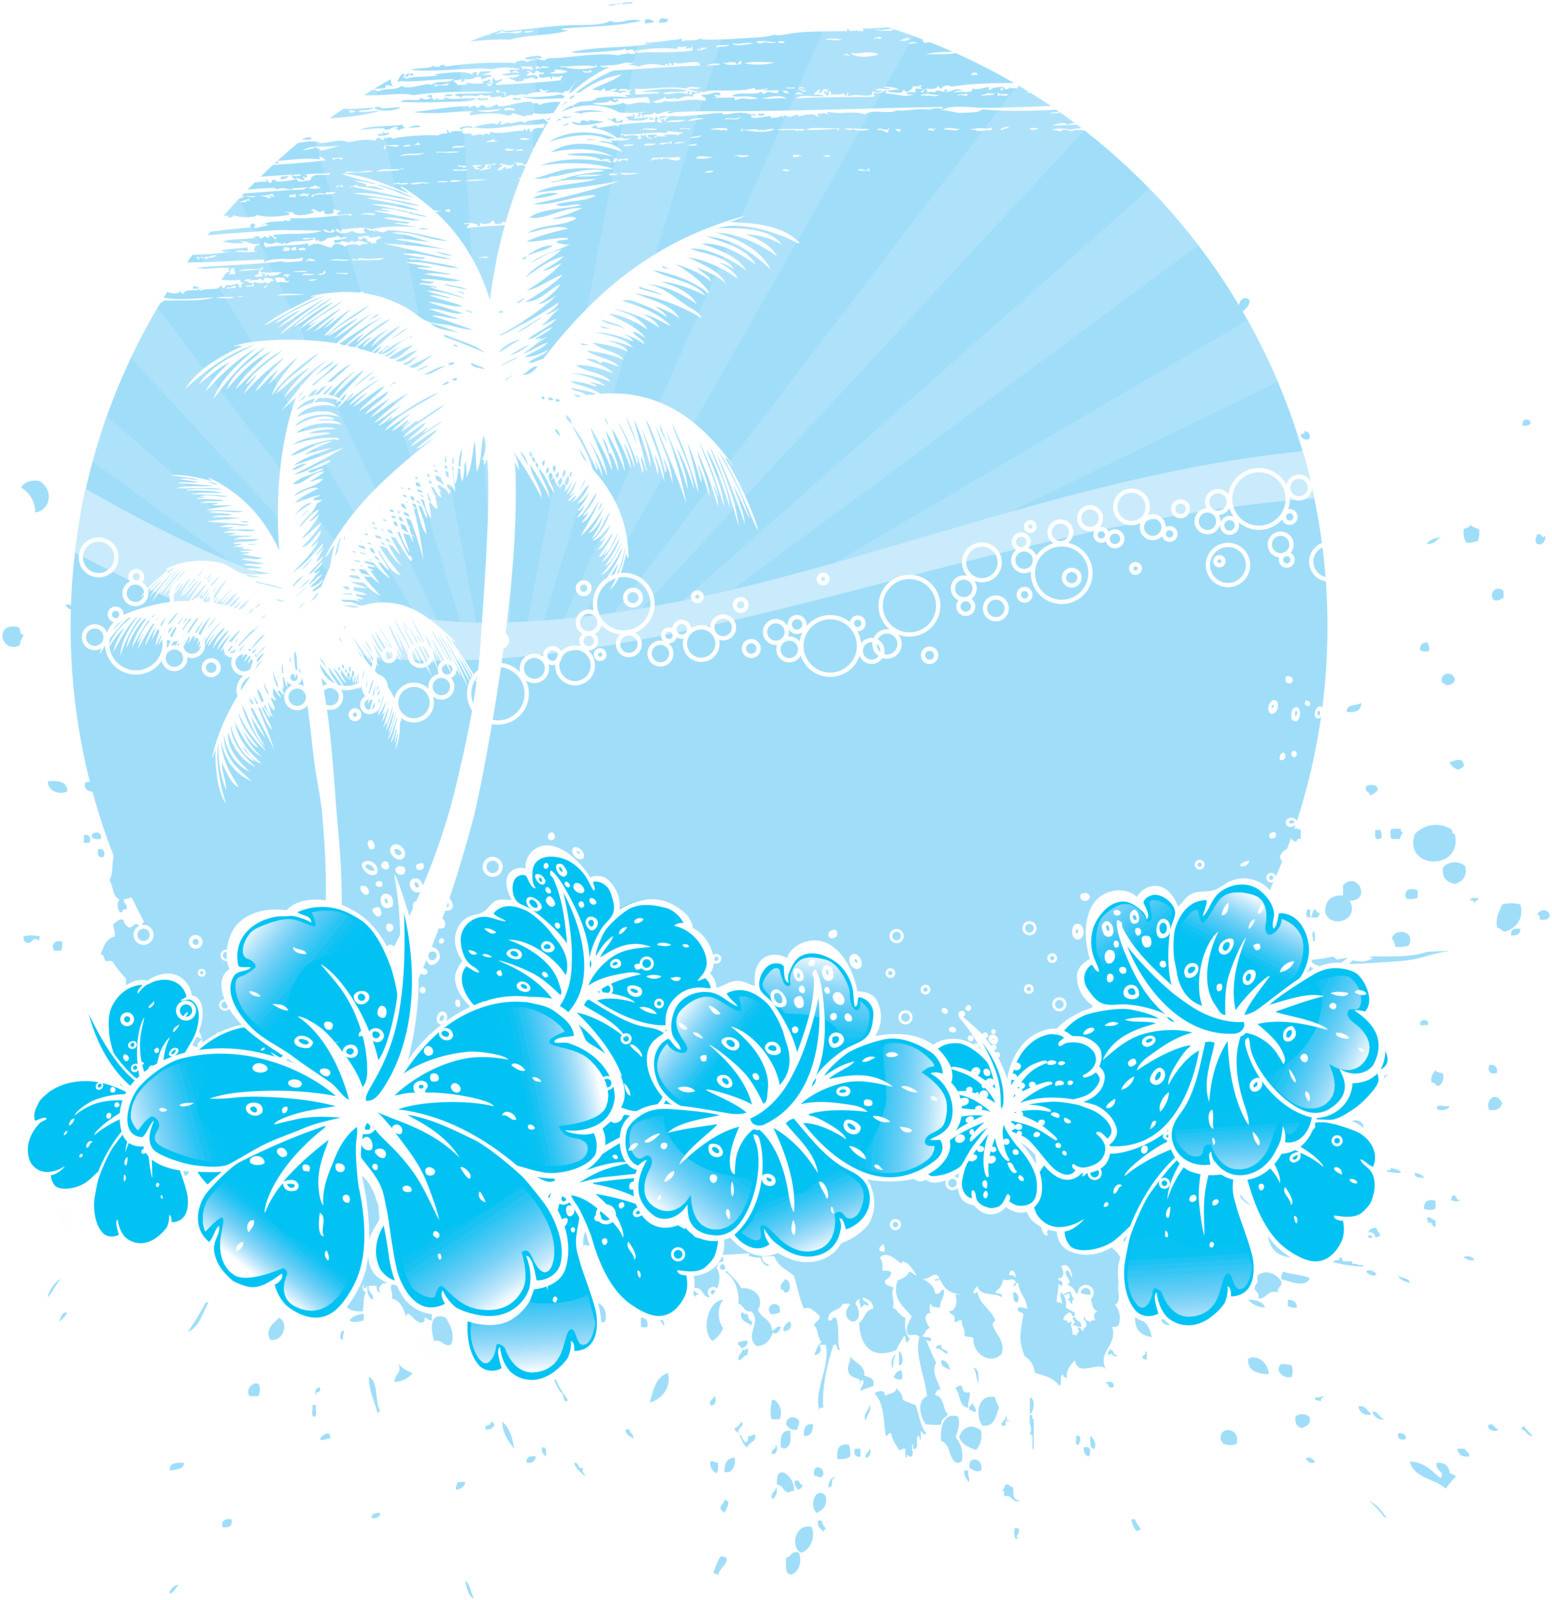 Vector illustration of Tropic back with palms